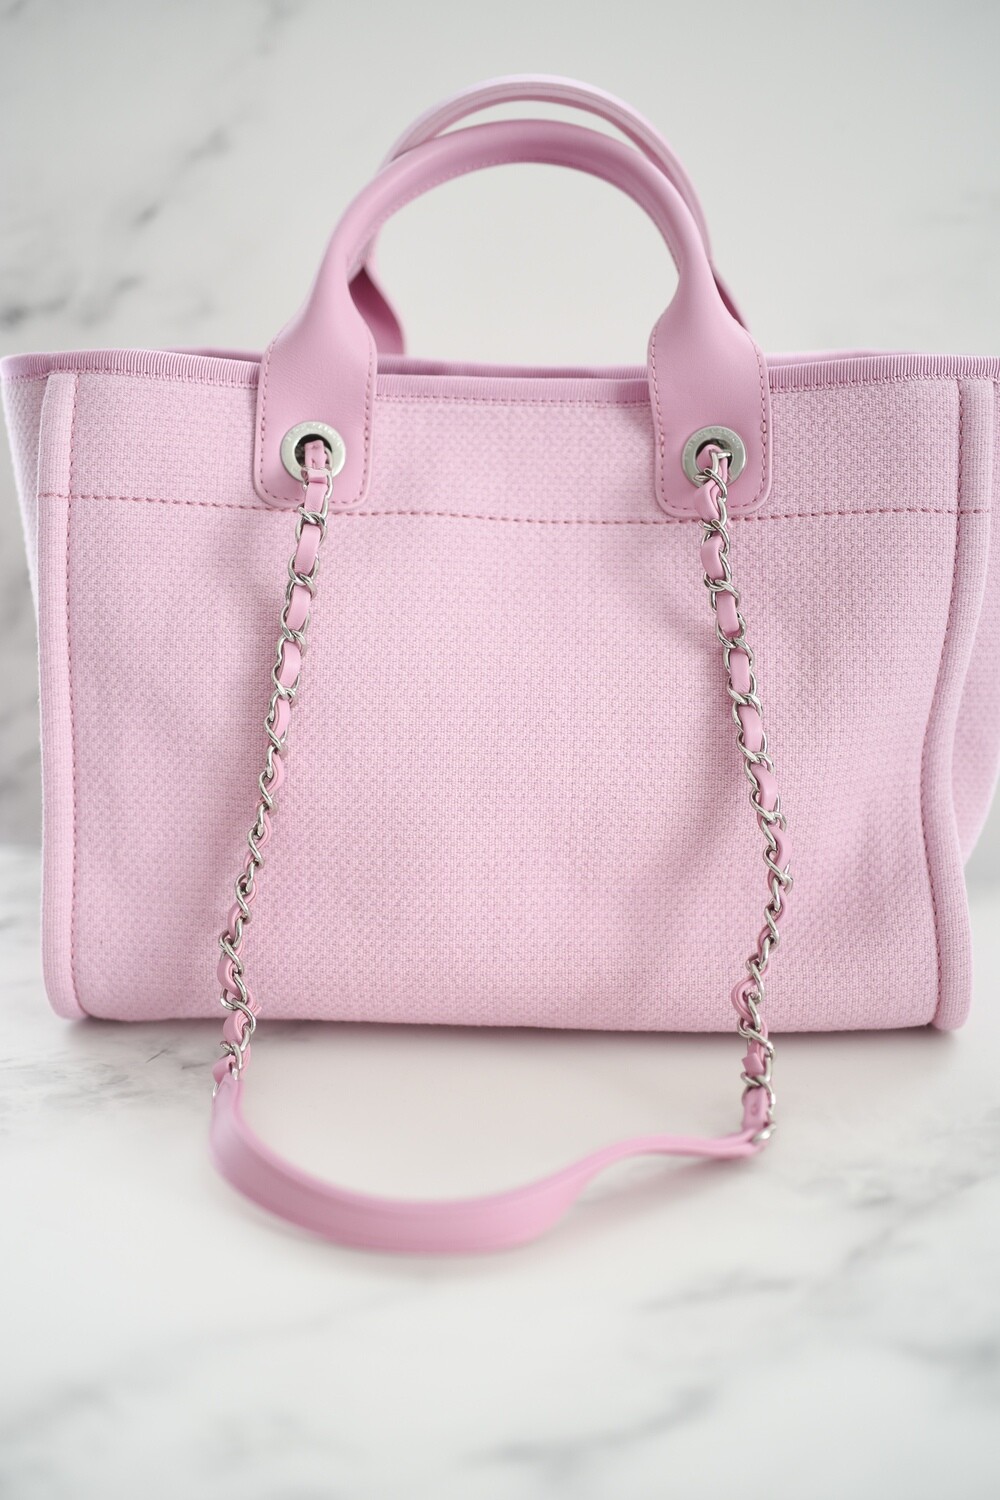 Chanel Deauville Small with Handles and Pouch, Pink with Silver